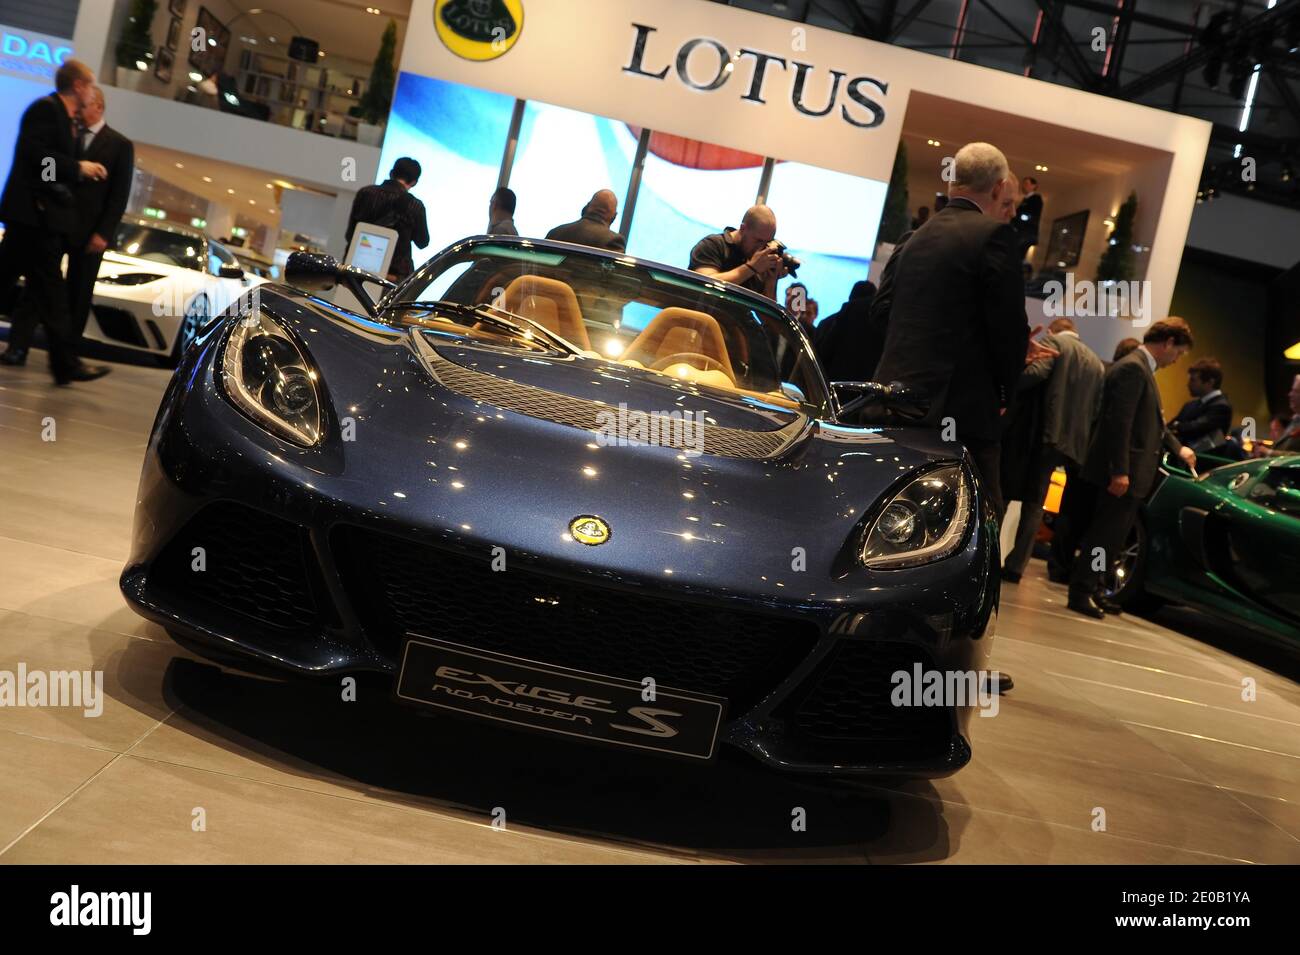 Page 2 - Lotus Exige High Resolution Stock Photography and Images - Alamy